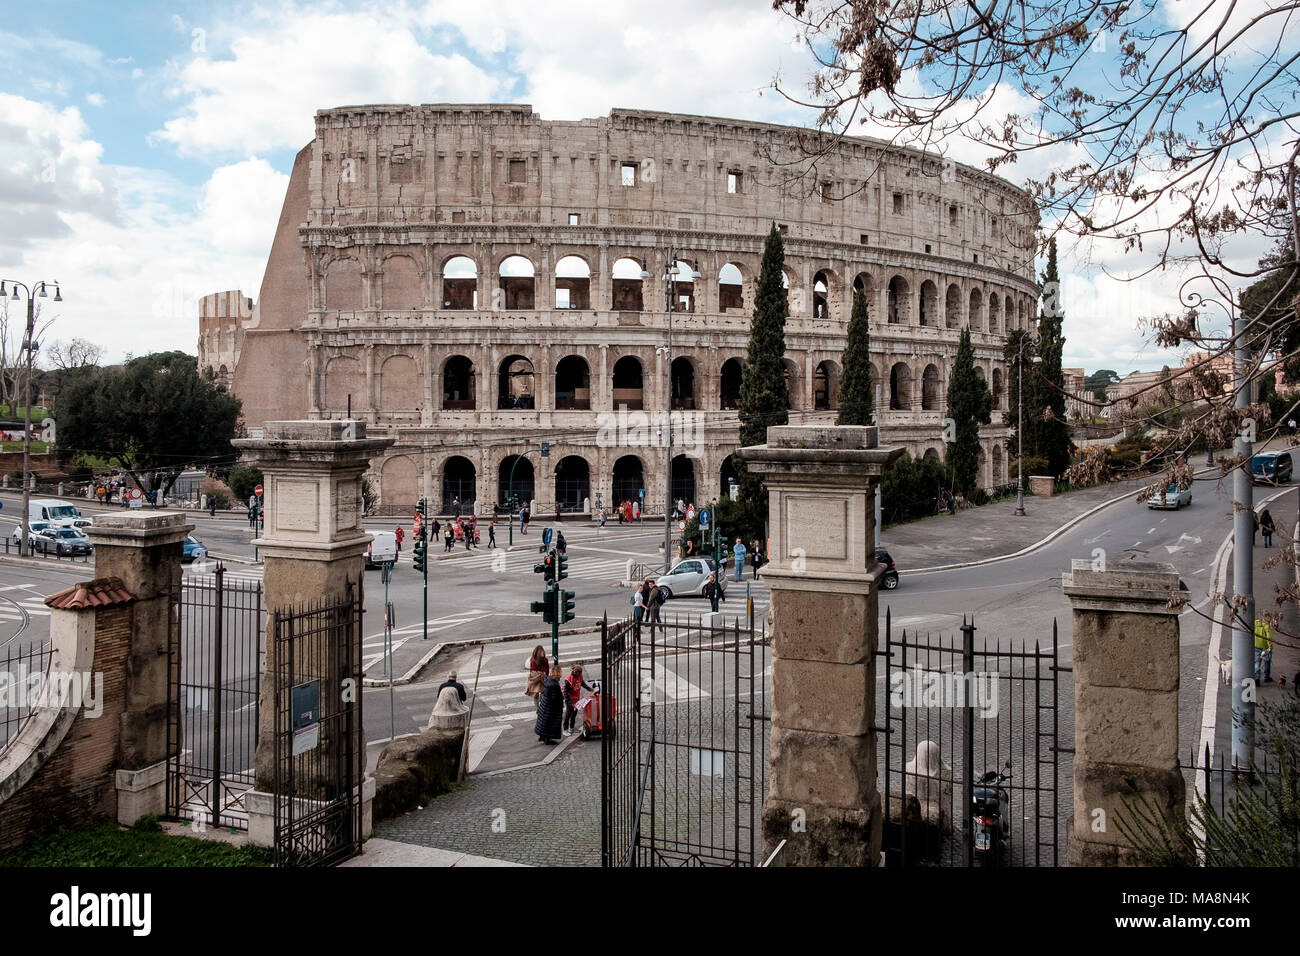 The Colosseum, Rome from the gates to The Oppian Hill Park. Stock Photo